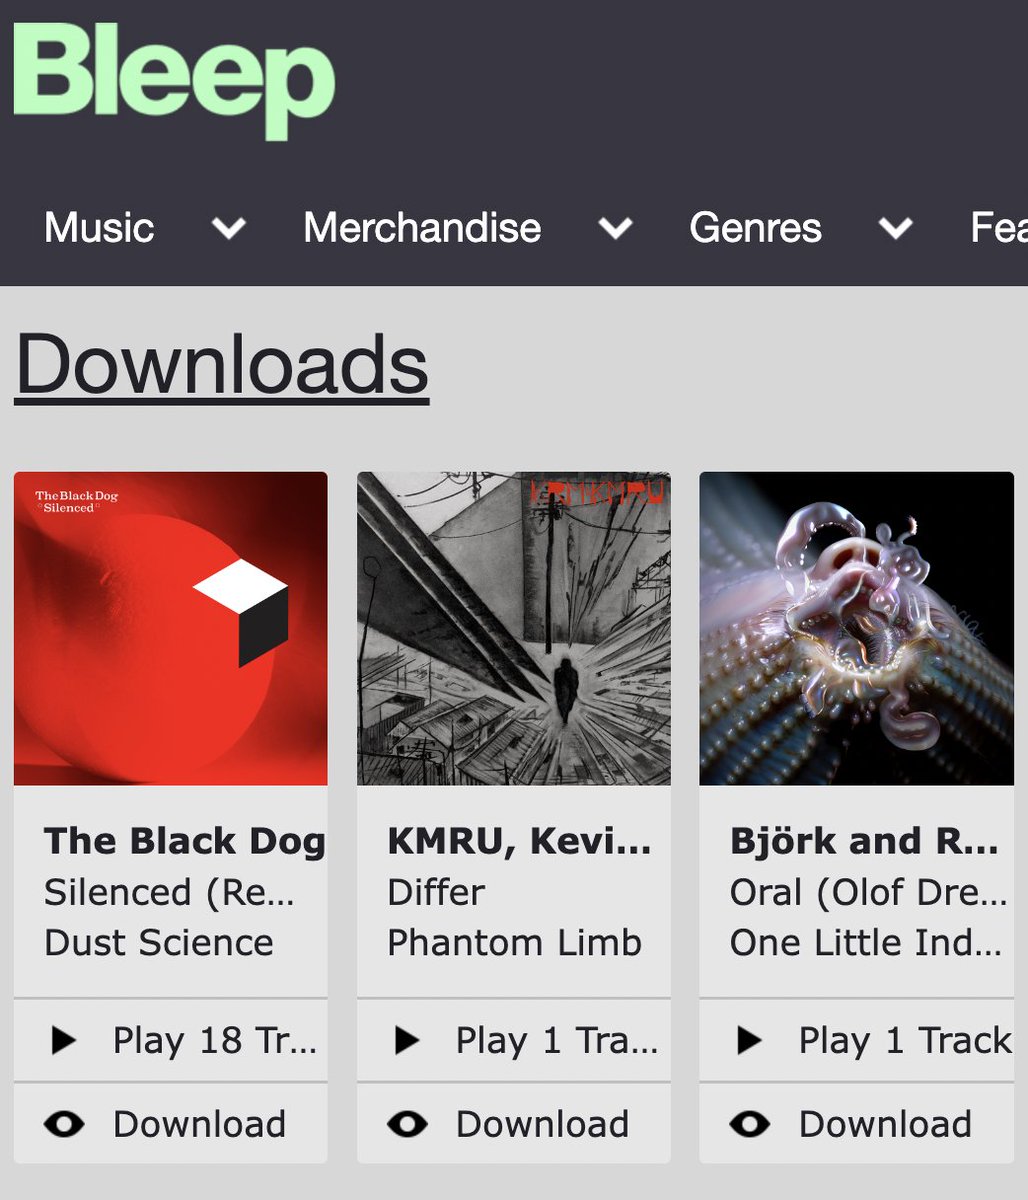 Large thx to @bleep for making KRM / @joseph_kamaru 'Differ' (@phntmlimb ) one of their featured downloads of the week.... 😍